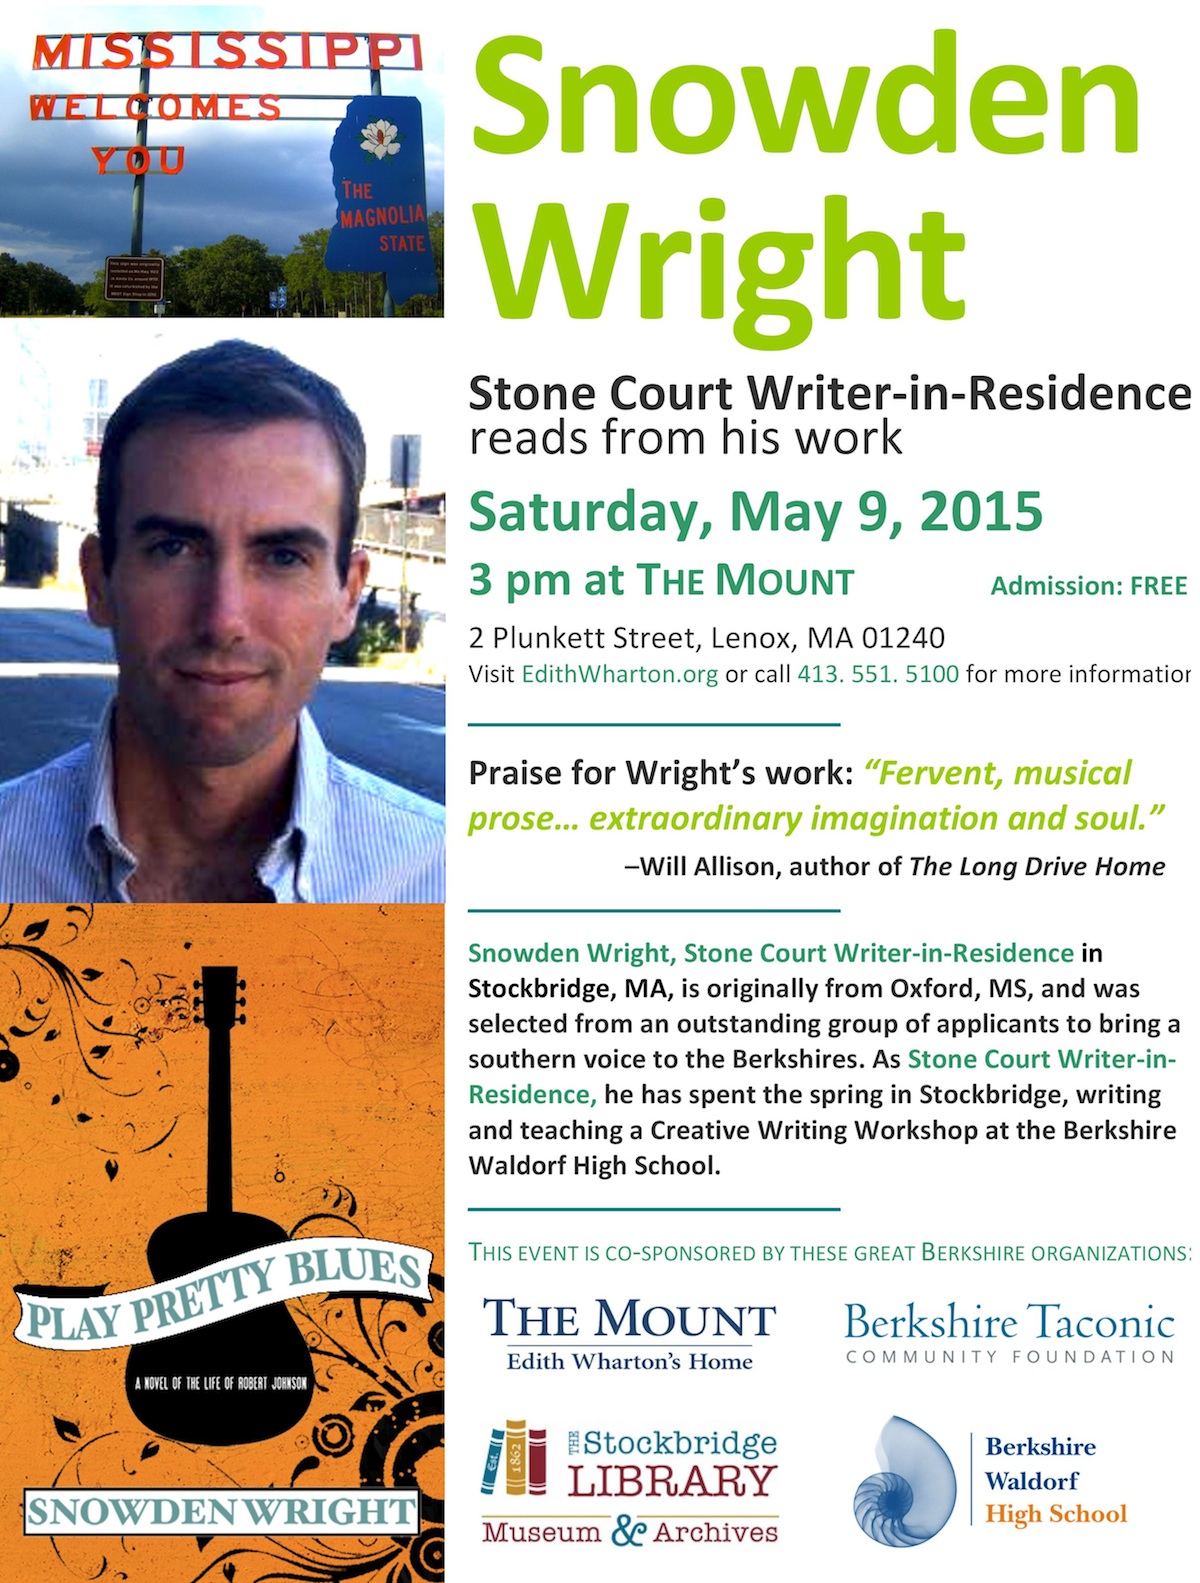 Snowden wright Stone Court Writer-in-Residence reads from his work